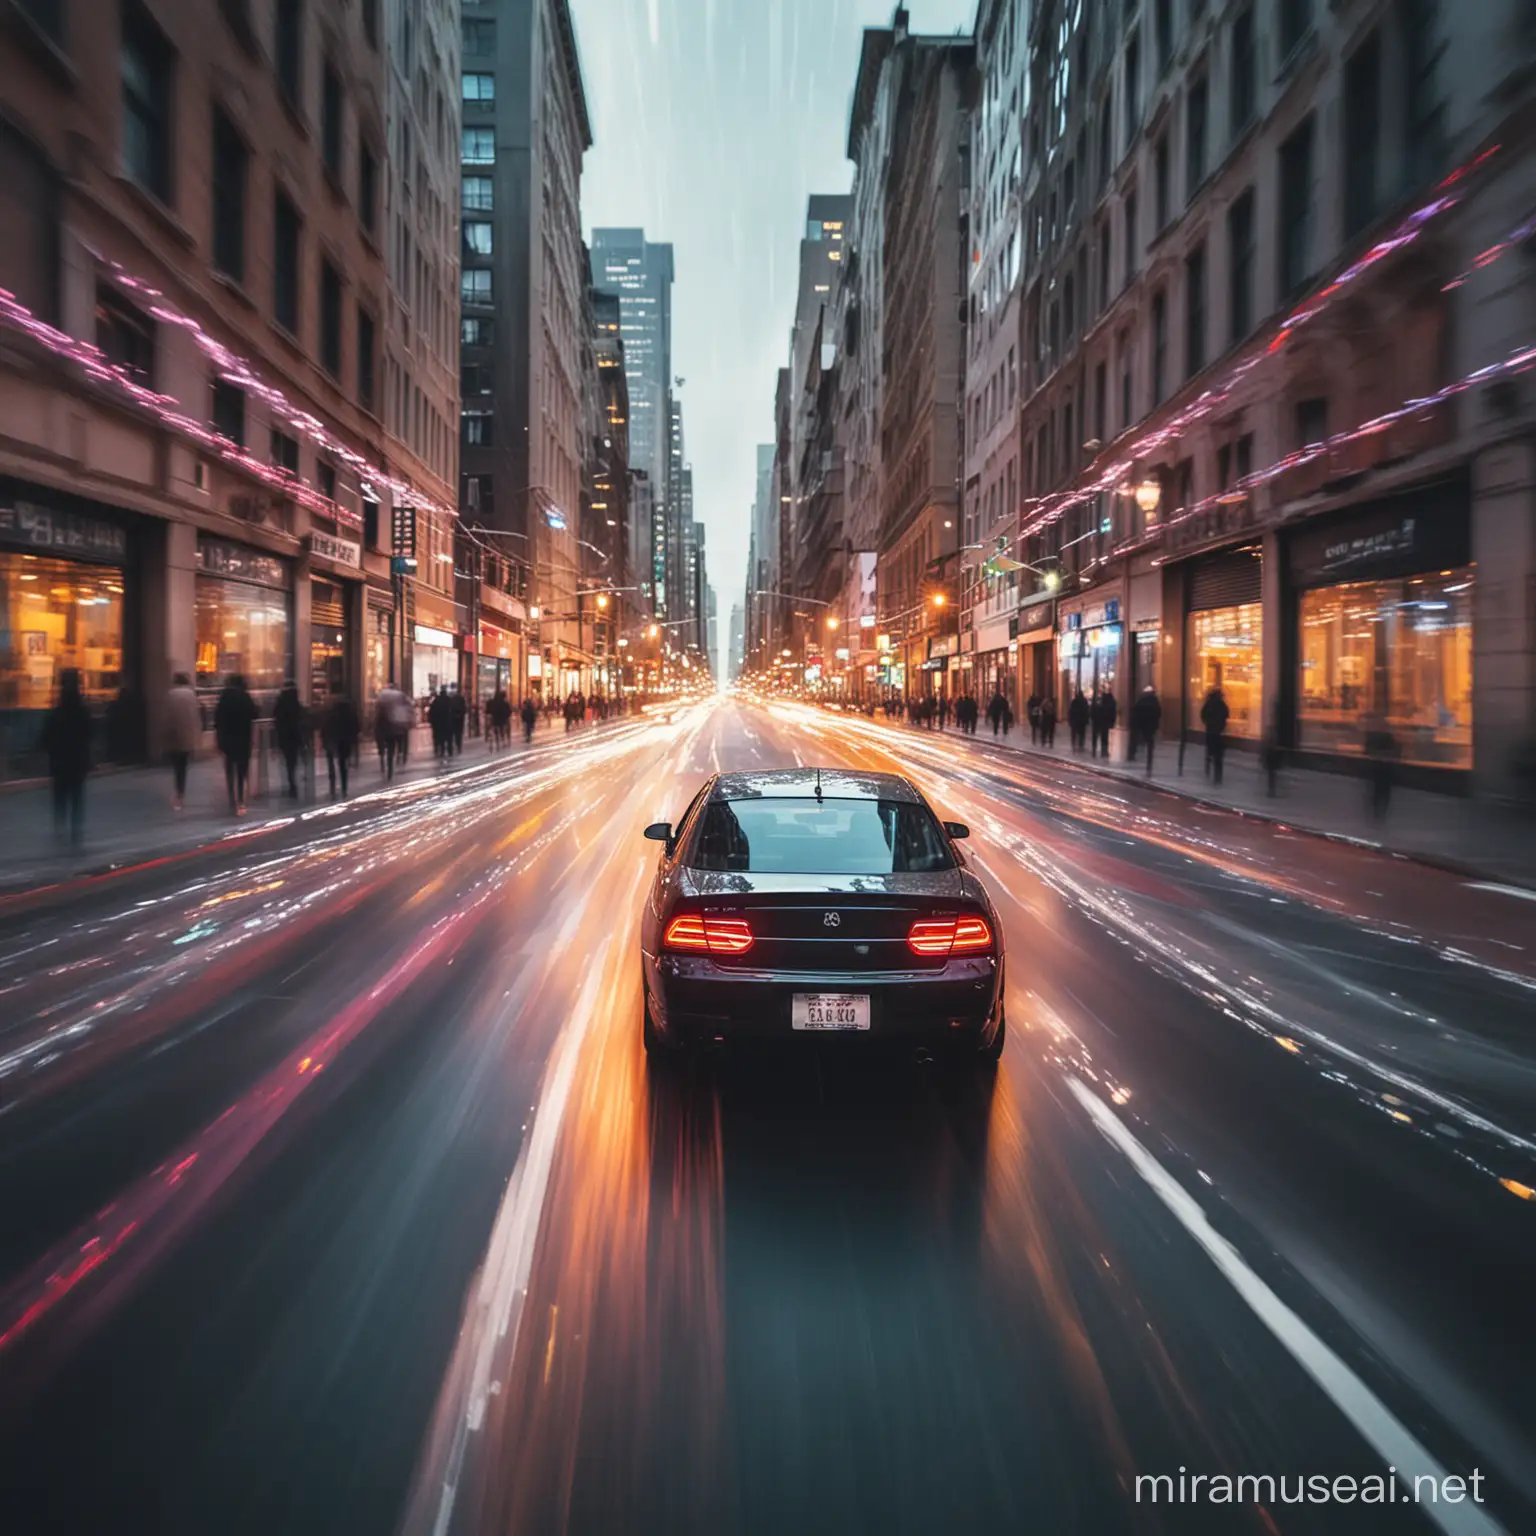 Urban Speed Abstract Car Driving Through Vibrant Cityscape